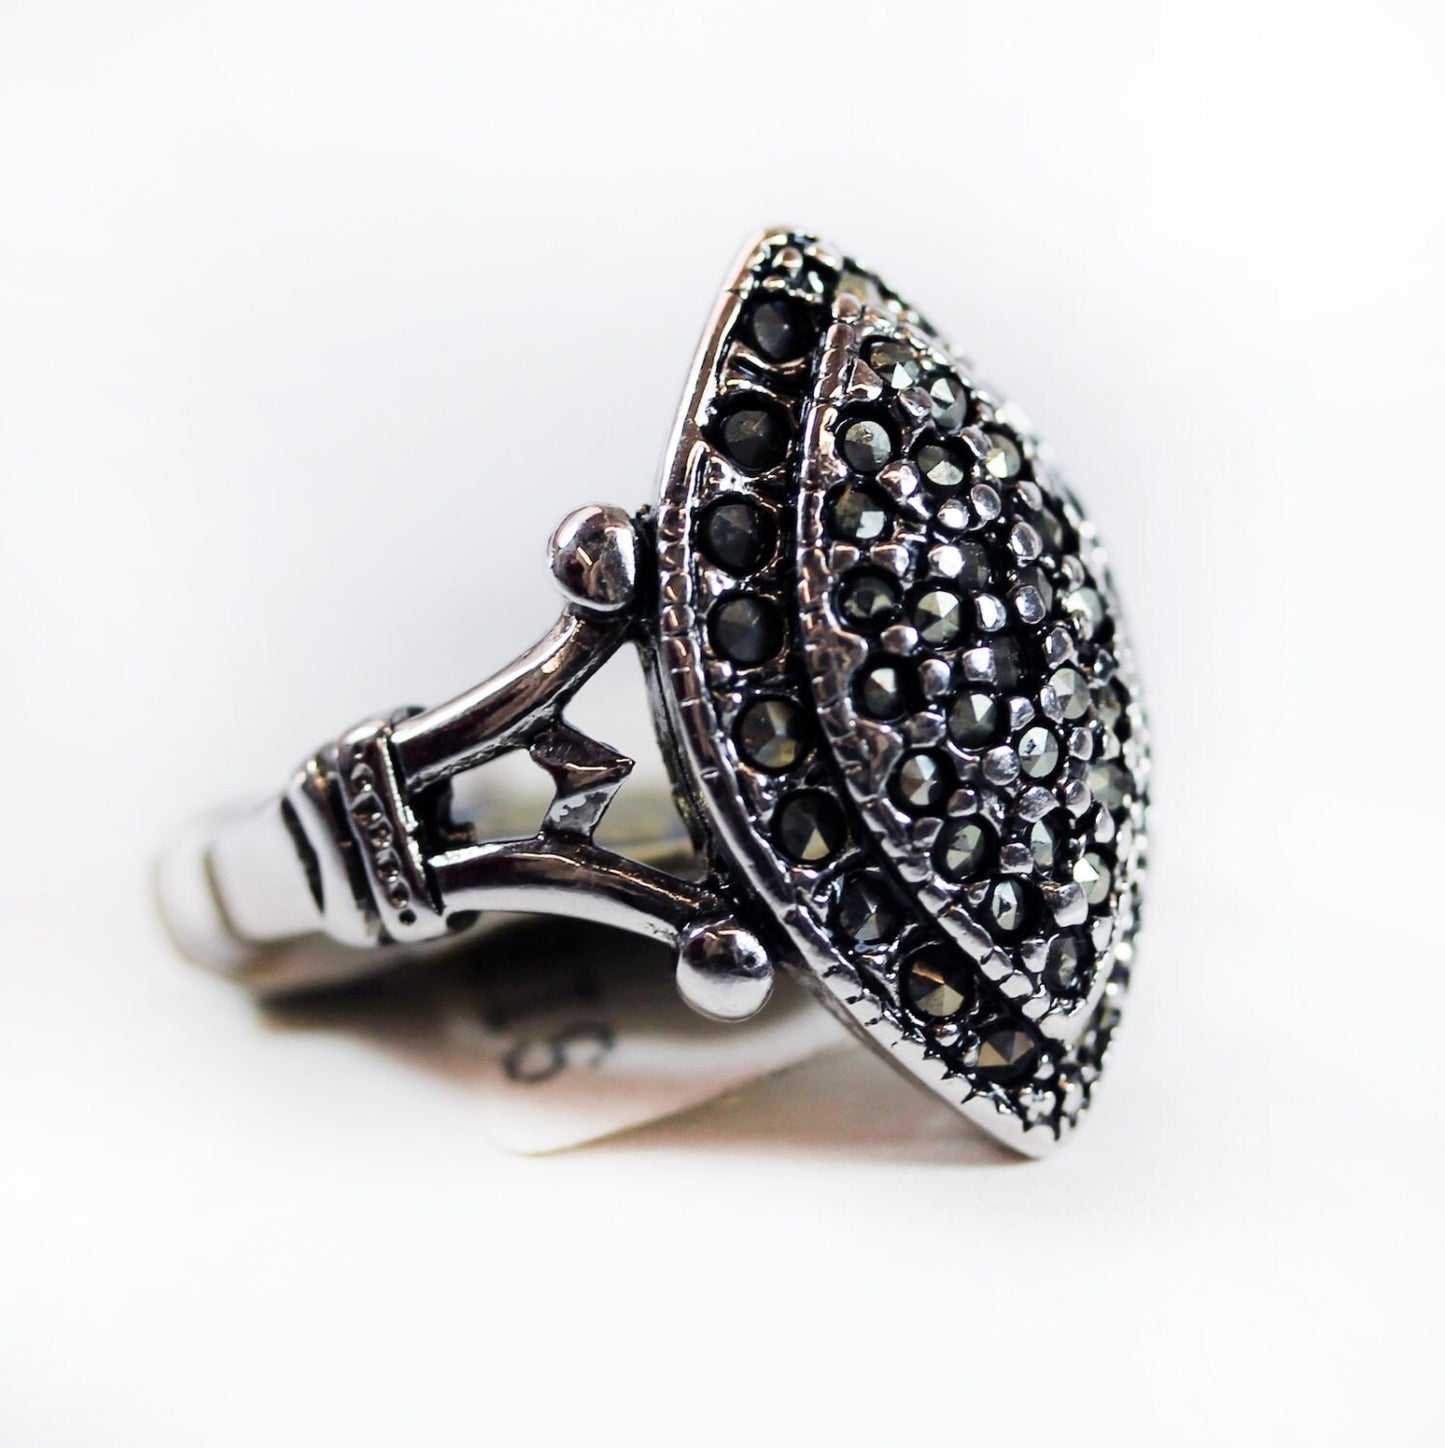 Vintage Ring Genuine Marcasite Pave Ring 18k White Gold Silver  #R1674 Size: 6